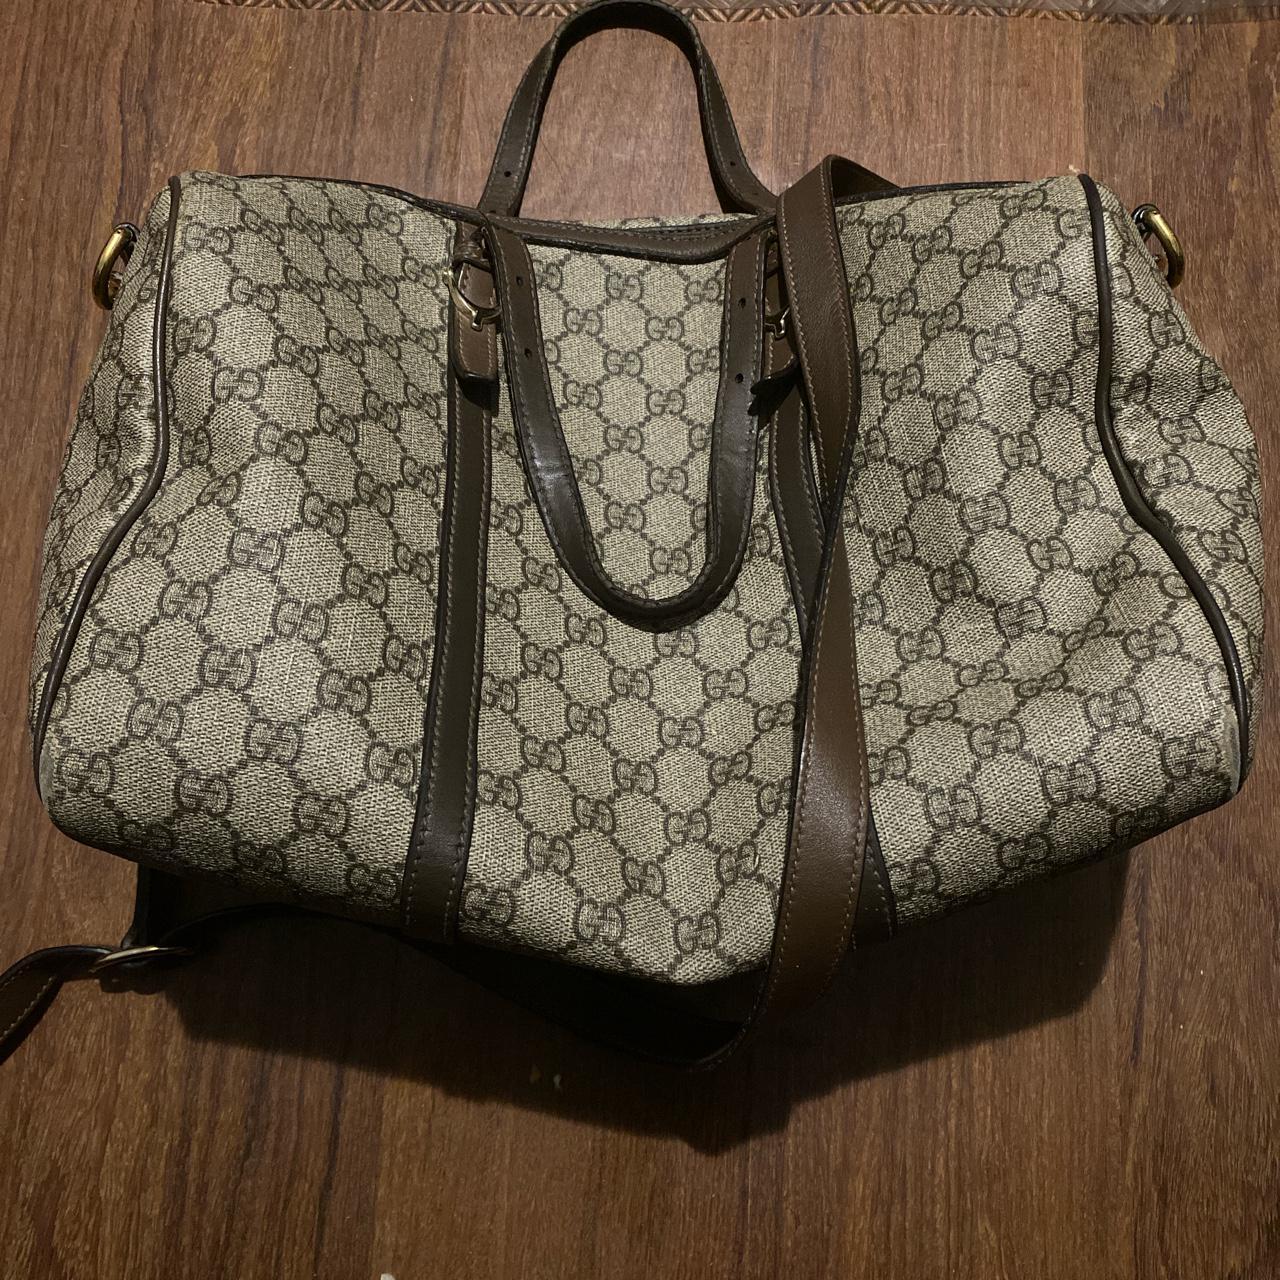 Gucci bag with crossbody strap. Wear on handles but... - Depop